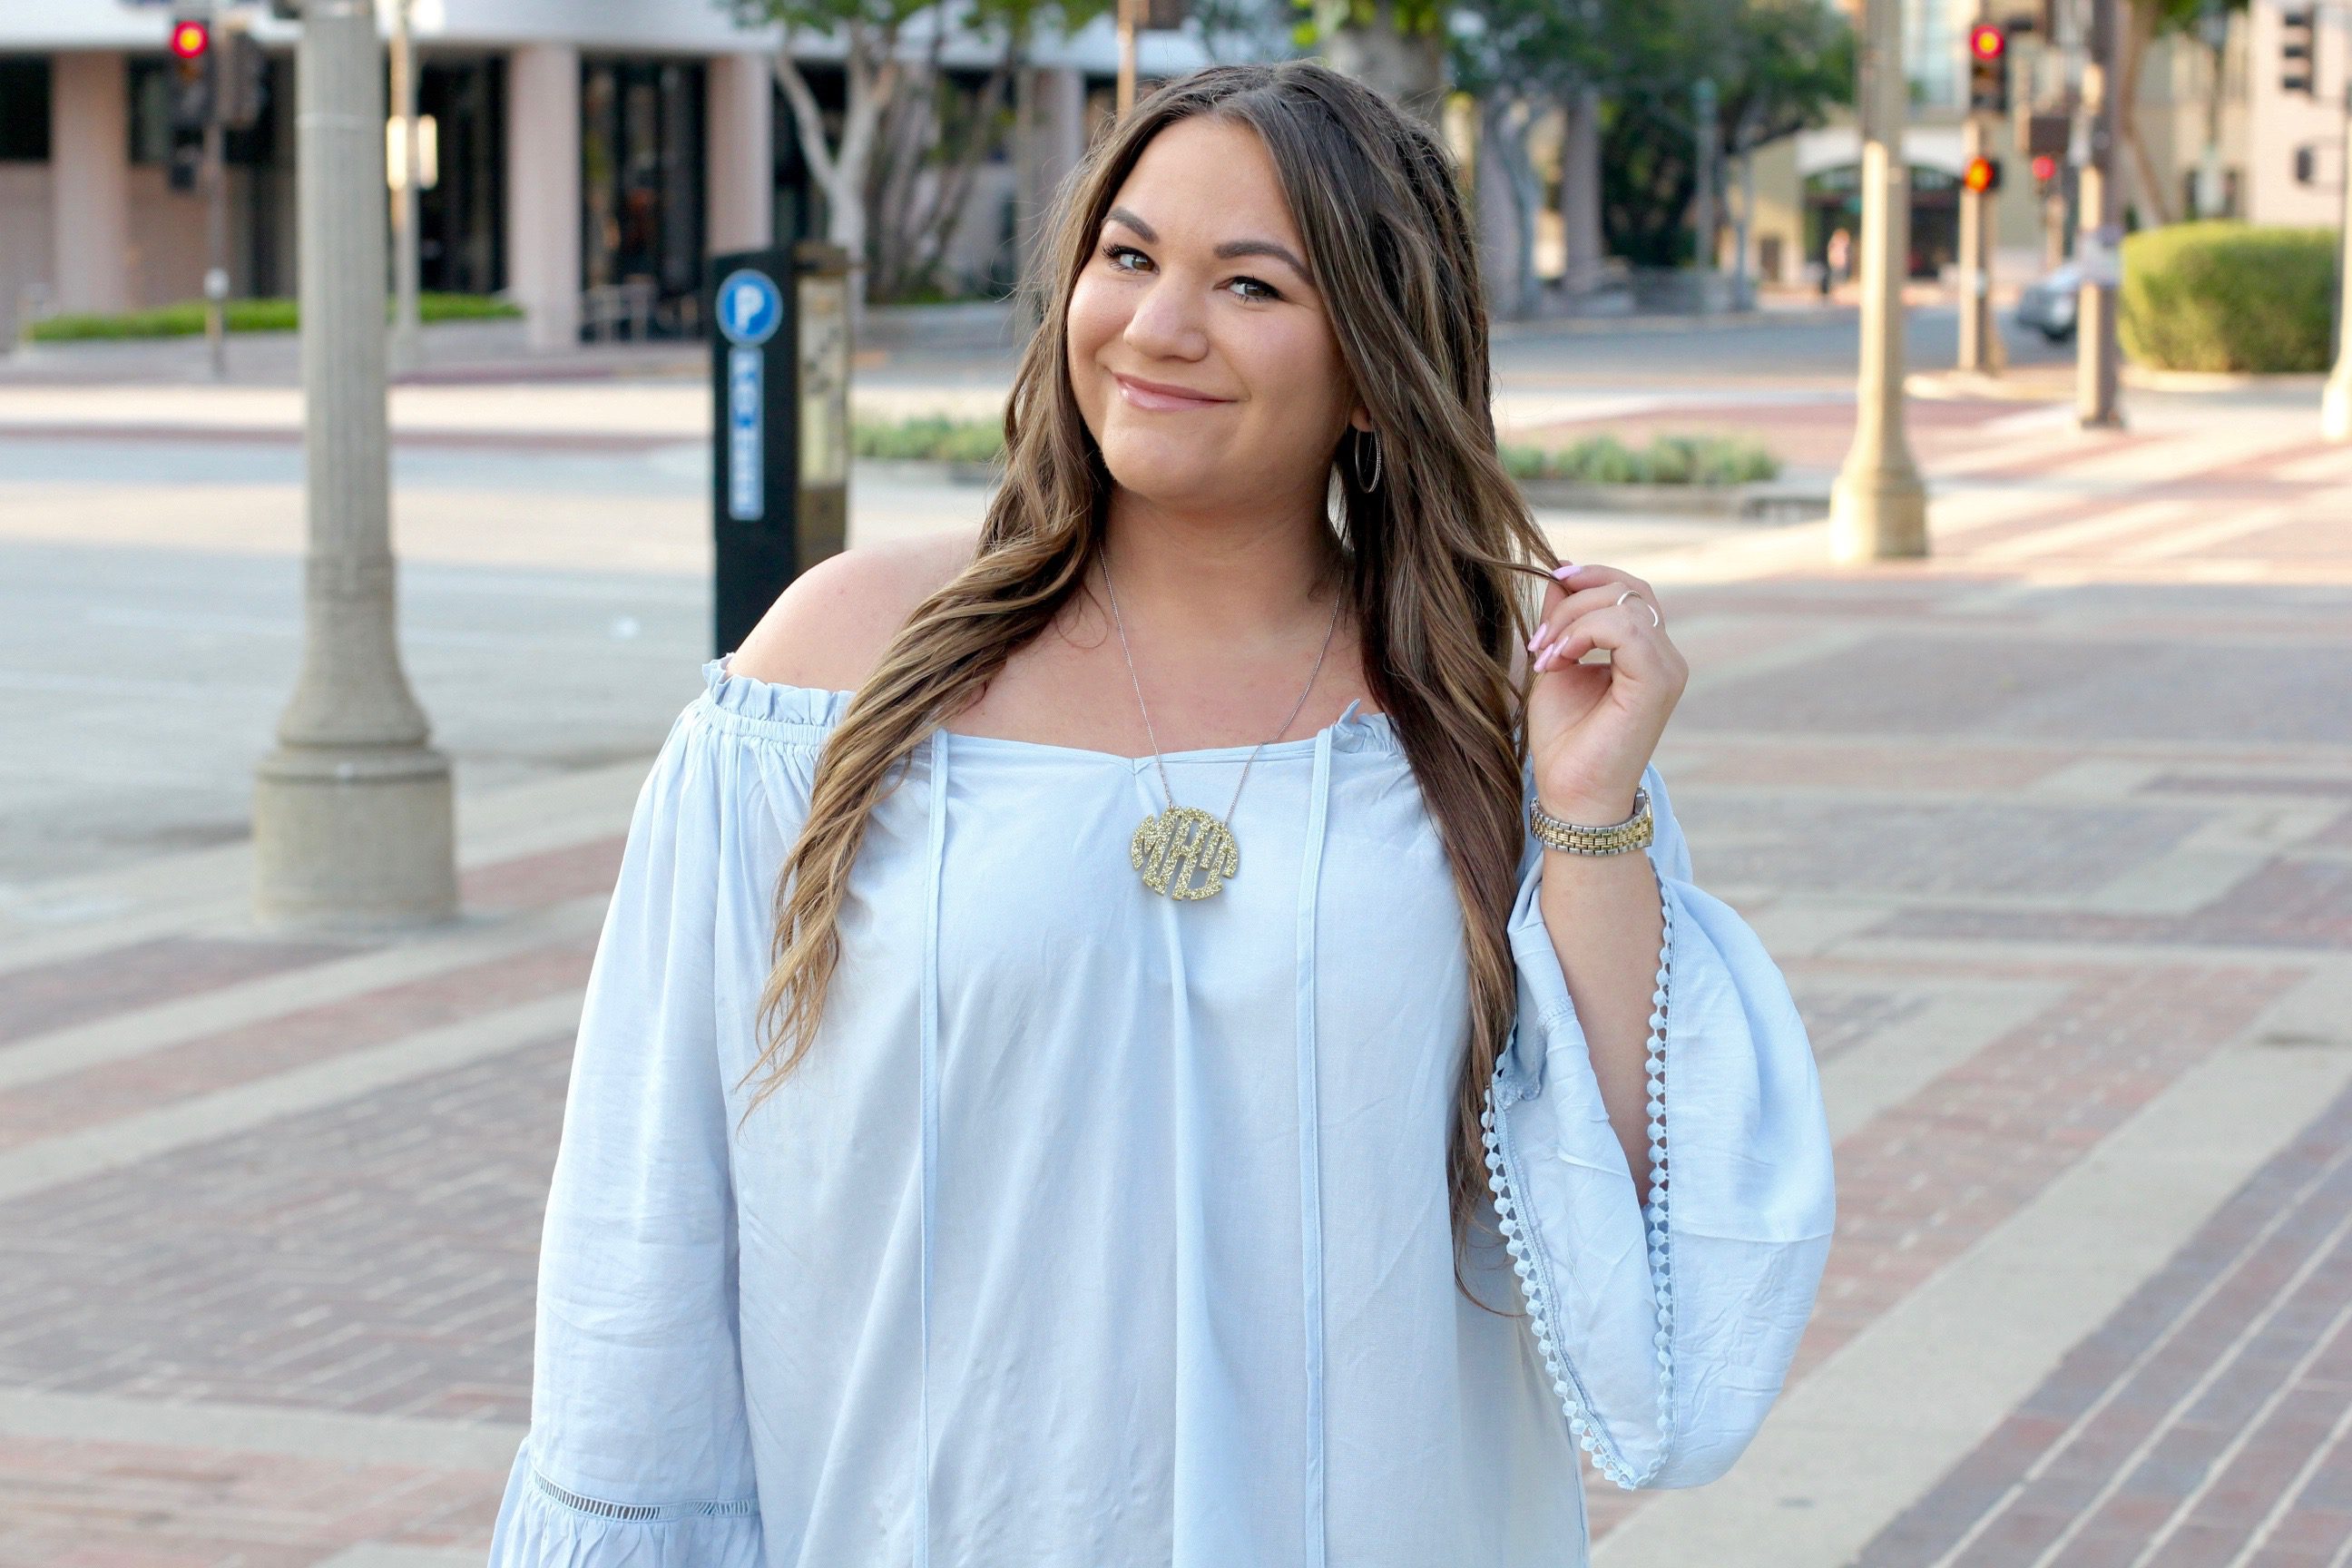 missyonmadison, baublebar monogram necklace, acrylic monogram necklace, white skinny jeans, old navy, old navy white skinny jeans, make me chic, make me chic off the shoulder bell top, cold shoulder top, off the shoulder blouse, la blogger, blogger, style blogger, la style, fall style, how to wear white jeans, how to style white after labor day, cobalt blue satchel, cobalt blue bag, blue suede shoes, blue pumps, cobalt blue pumps, cobalt blue suede pumps, hair goals, brunette hair, fashion blogger, fall trends, street style,